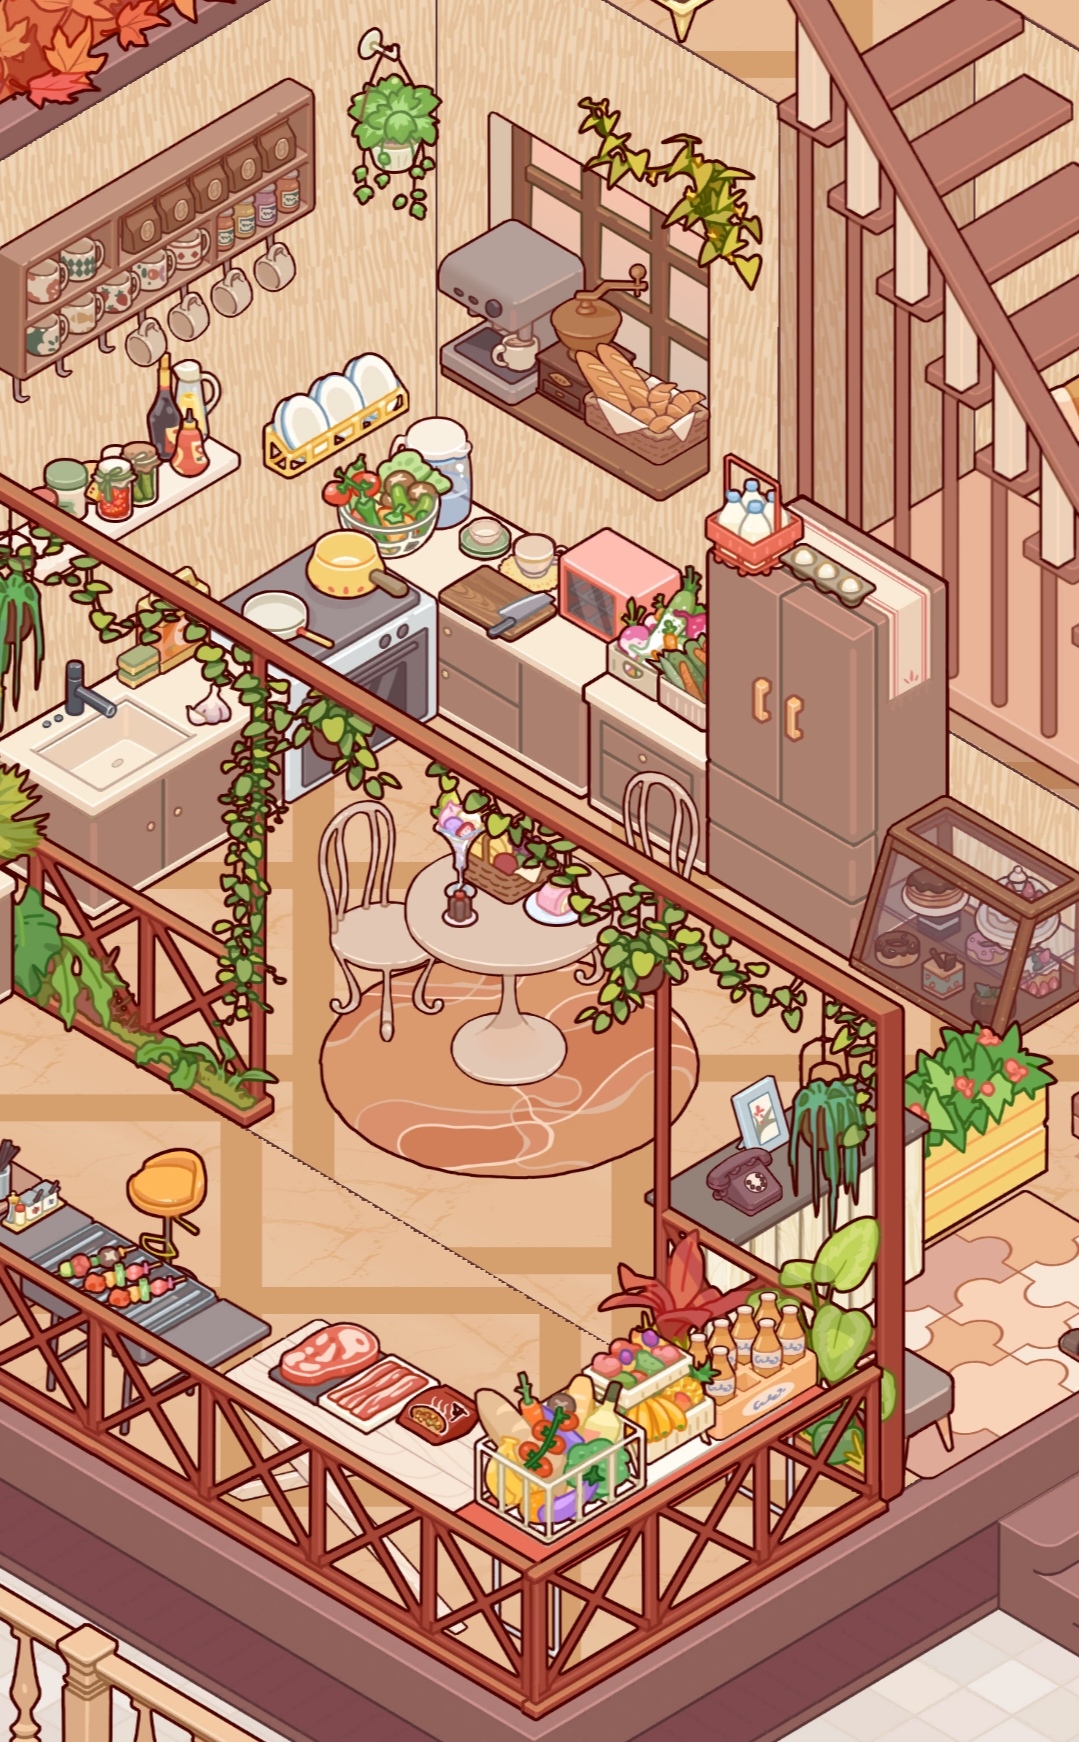 My Leisure Time sharing of coffee-colored small building and double space decoration